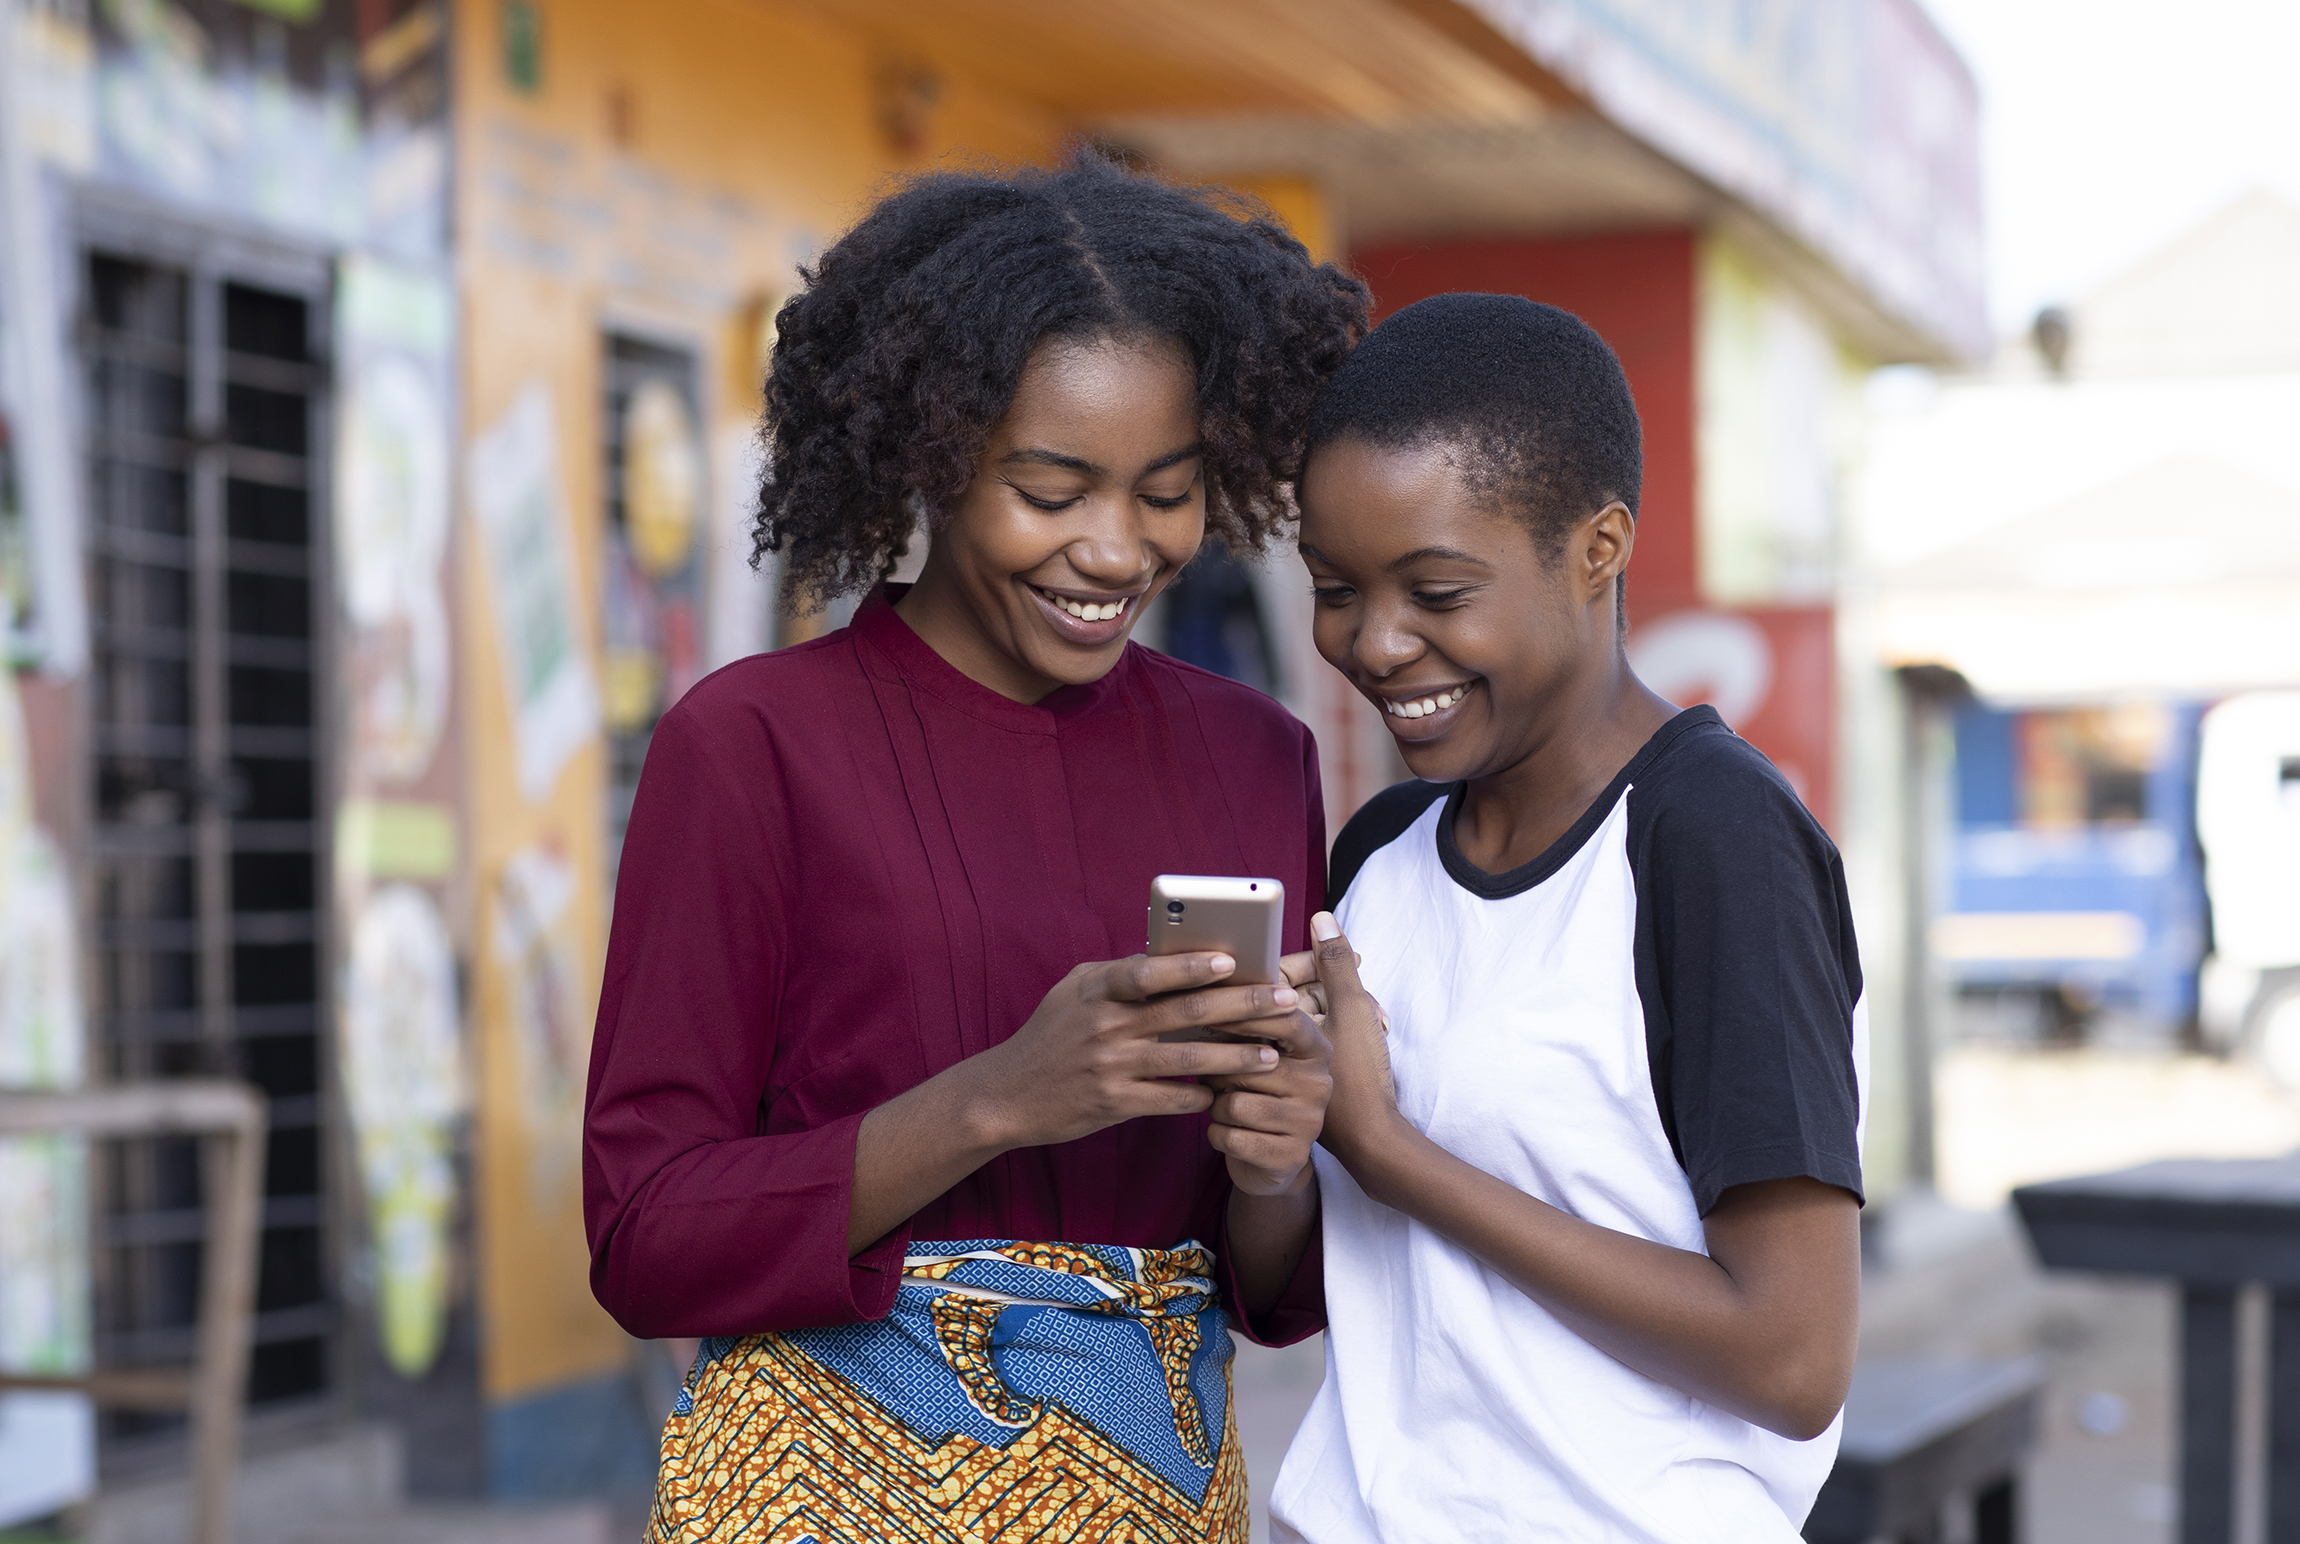 Two young Zambian friends laughing in the street while looking at a mobile phone